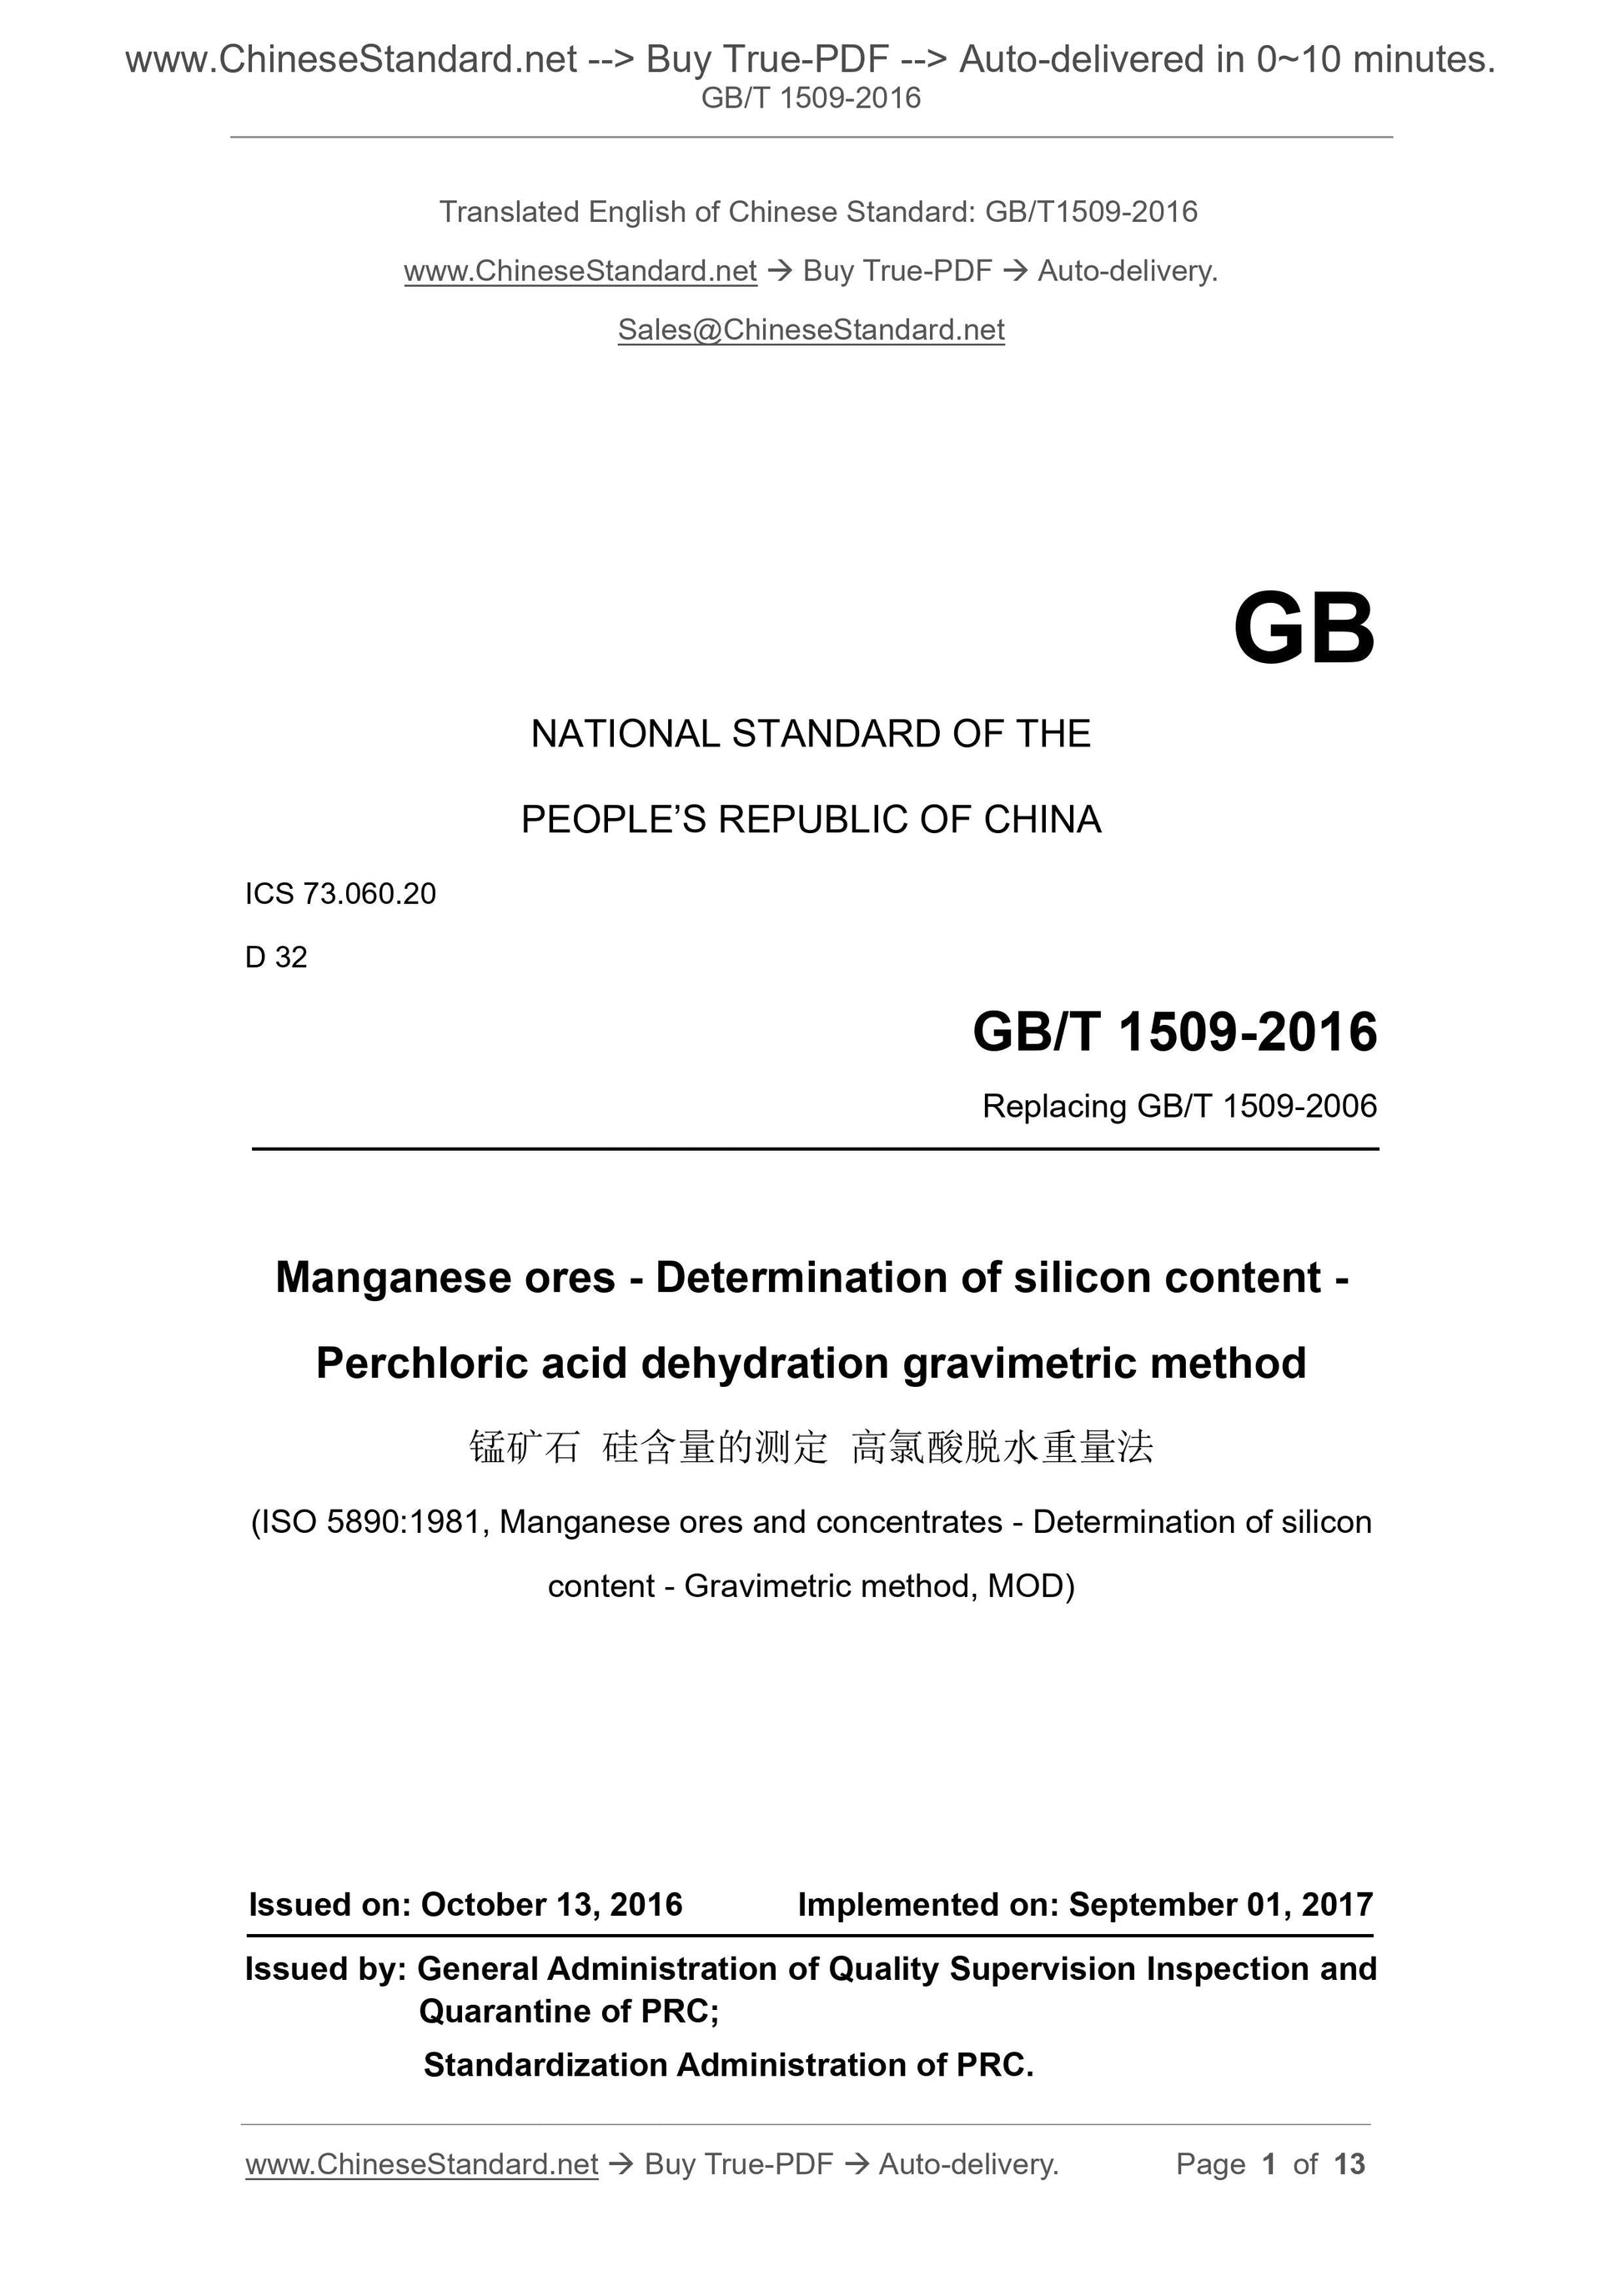 GB/T 1509-2016 Page 1